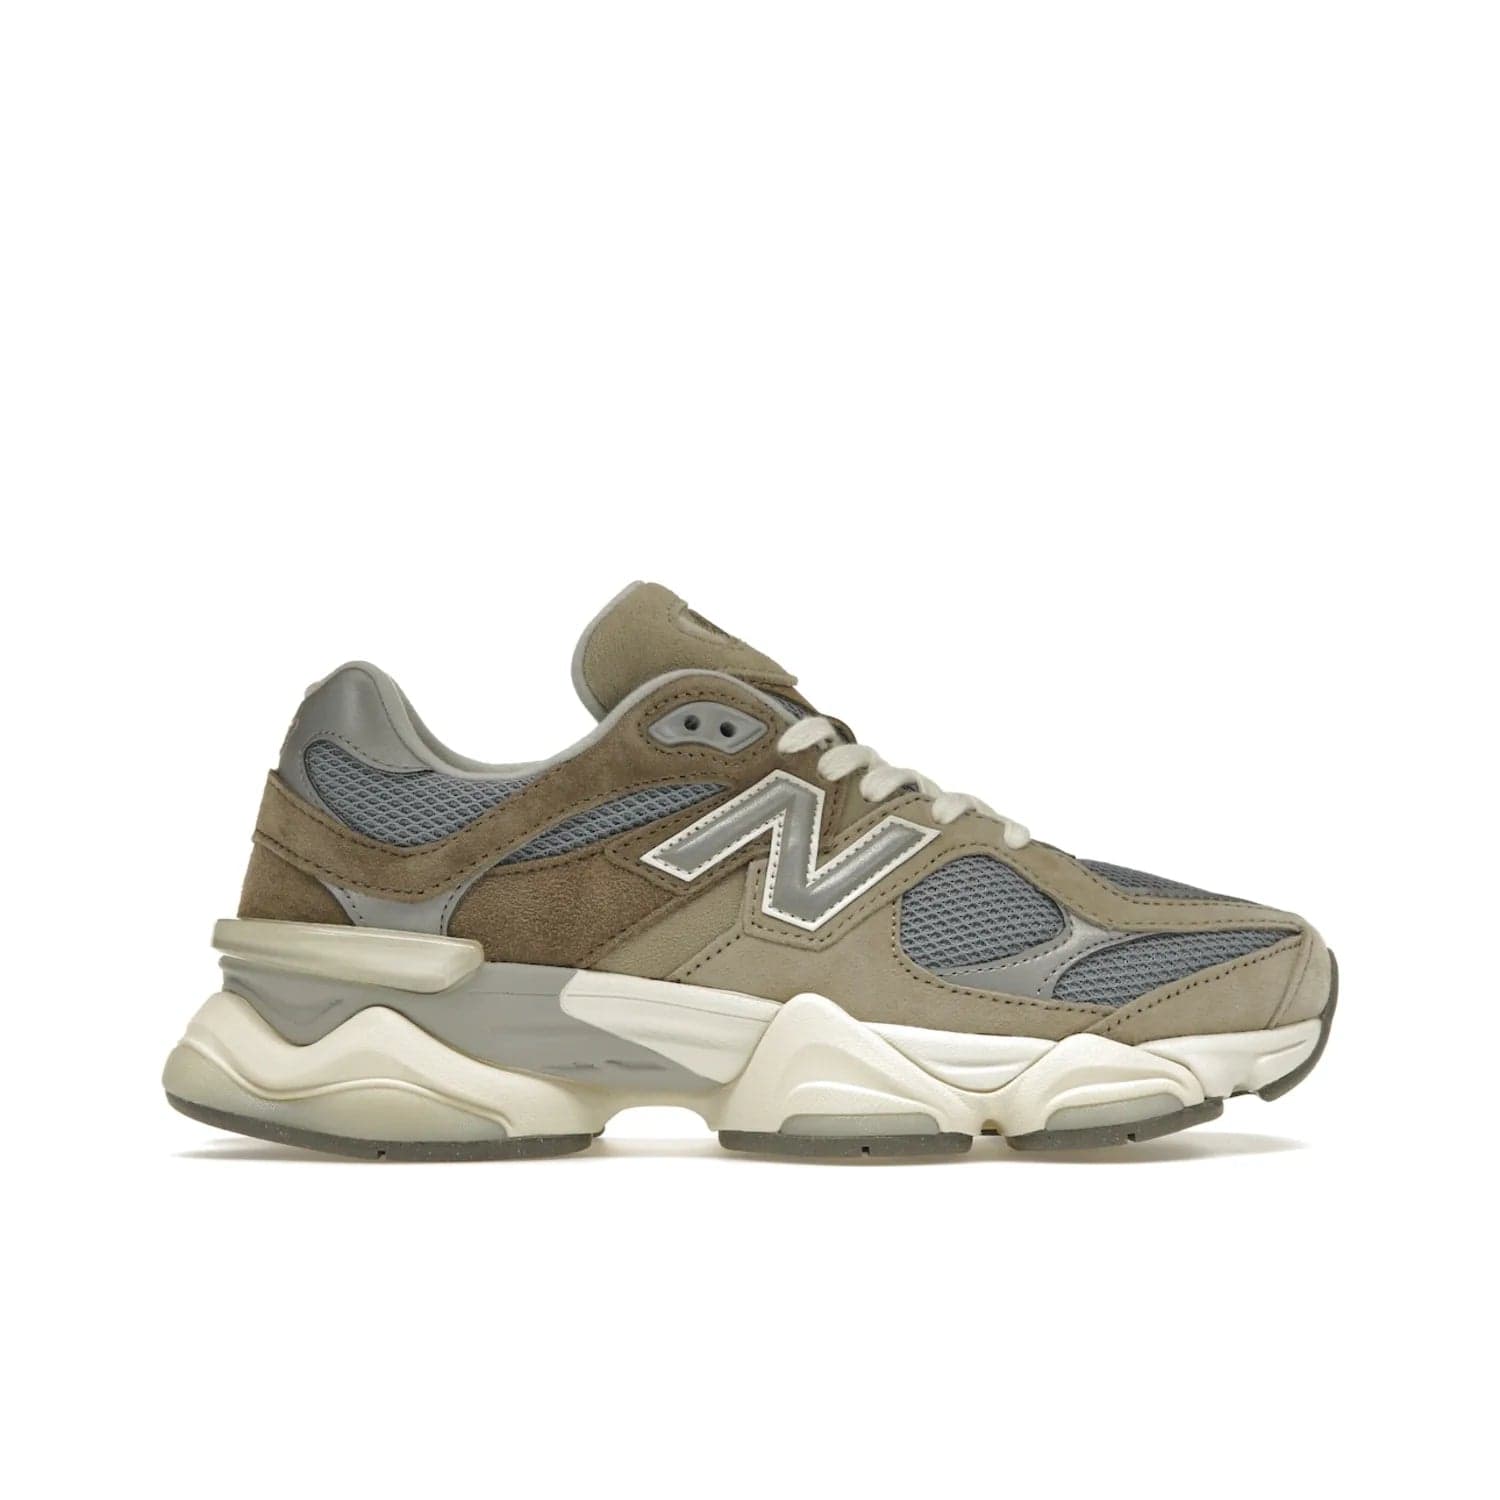 New Balance 9060 Mushroom - Image 1 - Only at www.BallersClubKickz.com - Get the New Balance 9060 Mushroom in stylish aluminum and mushroom tones. Featuring a porous mesh fabric with multiple suede overlays, a grey N symbol and rugged off-white/grey sole. Shop now and make a statement.